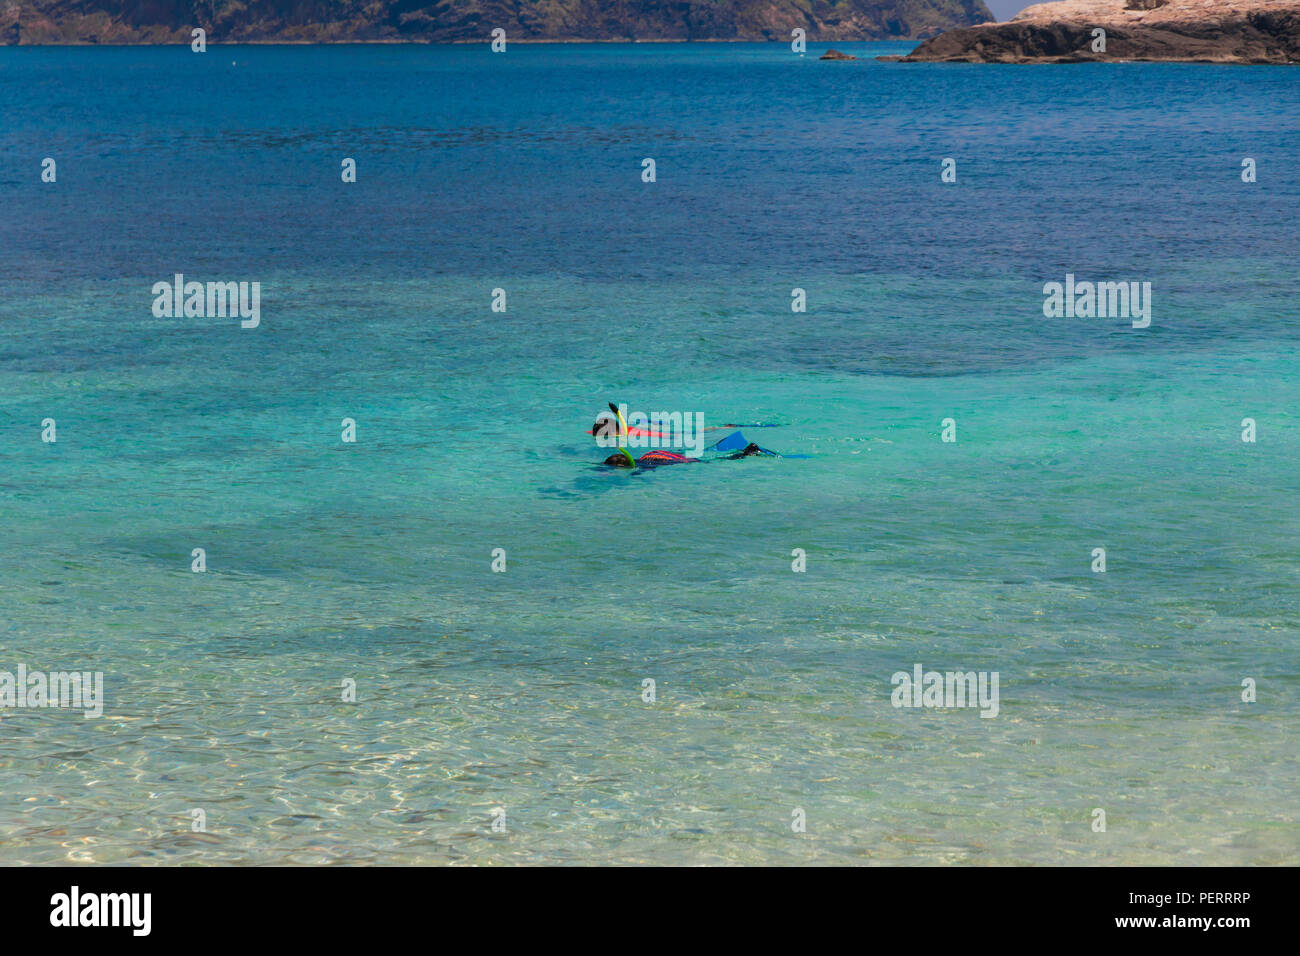 Two tourists snorkelling in the turquoise blue sea, in front of the shallow clear waters of Rawa beach, an island near Perhentian Kecil in Malaysia. Stock Photo